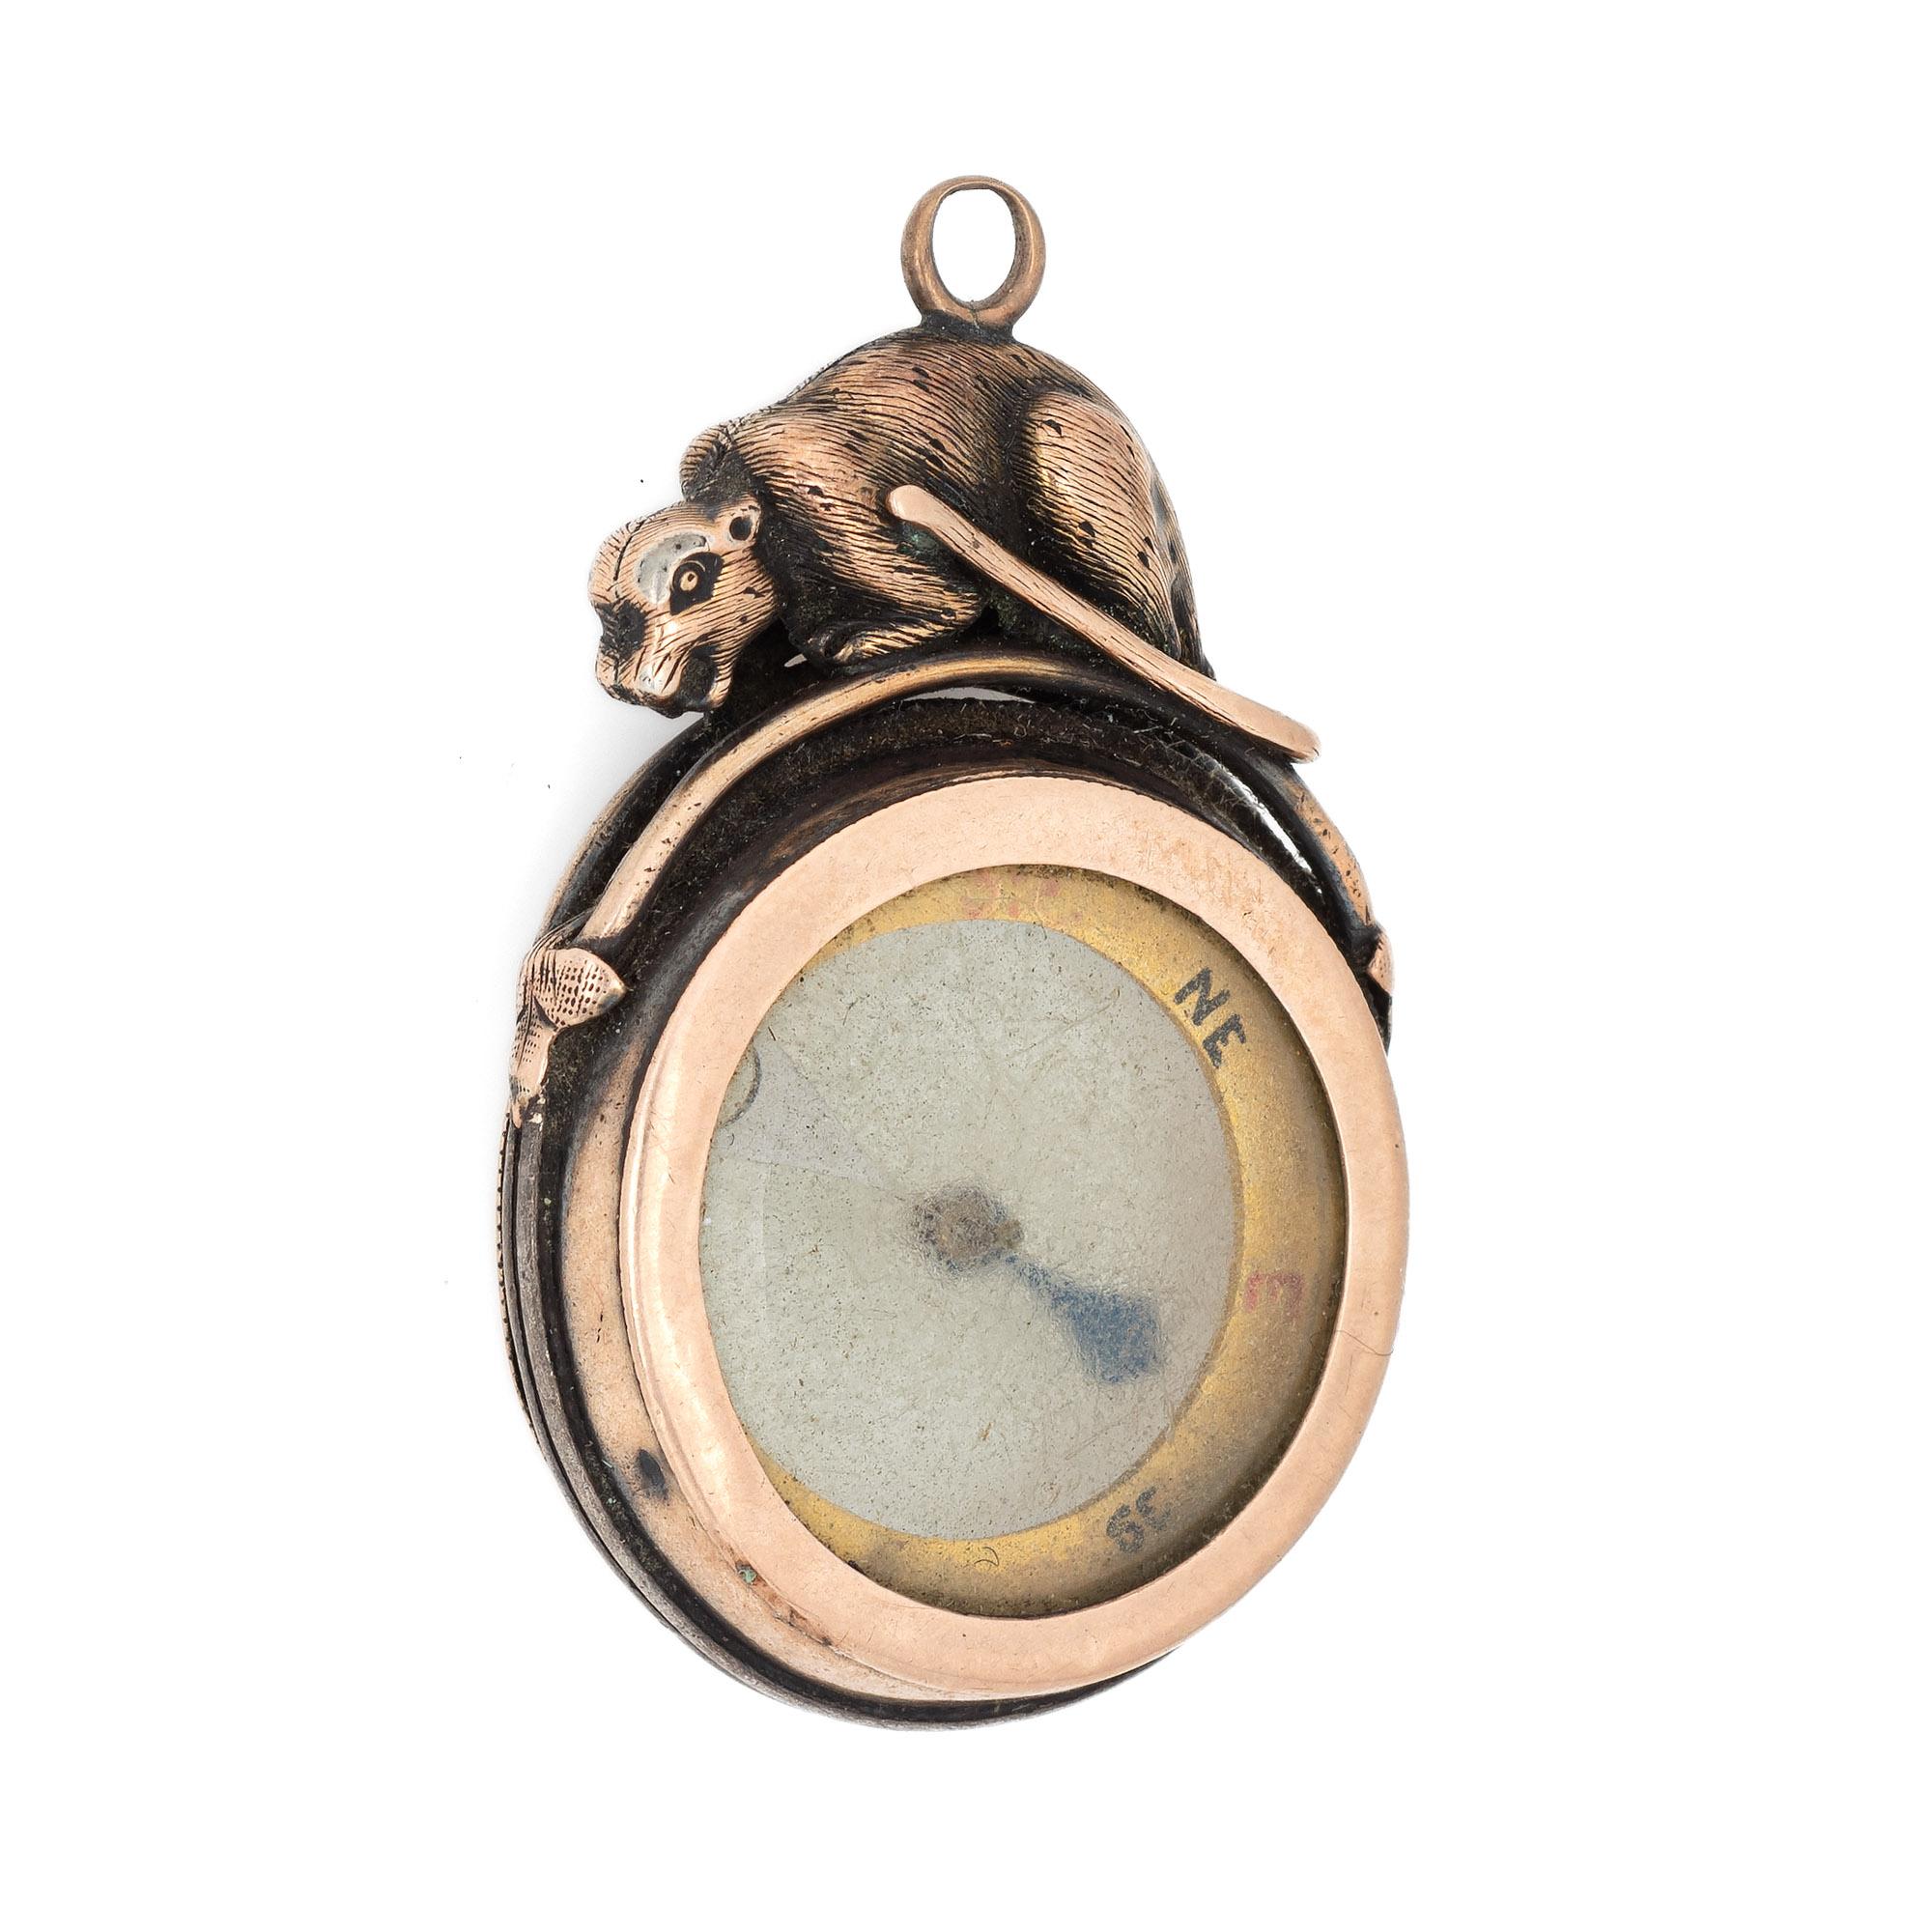 Antique Edwardian Compass Fob 9k Rose Gold Pendant Animal Motif Vintage Jewelry In Good Condition For Sale In Torrance, CA